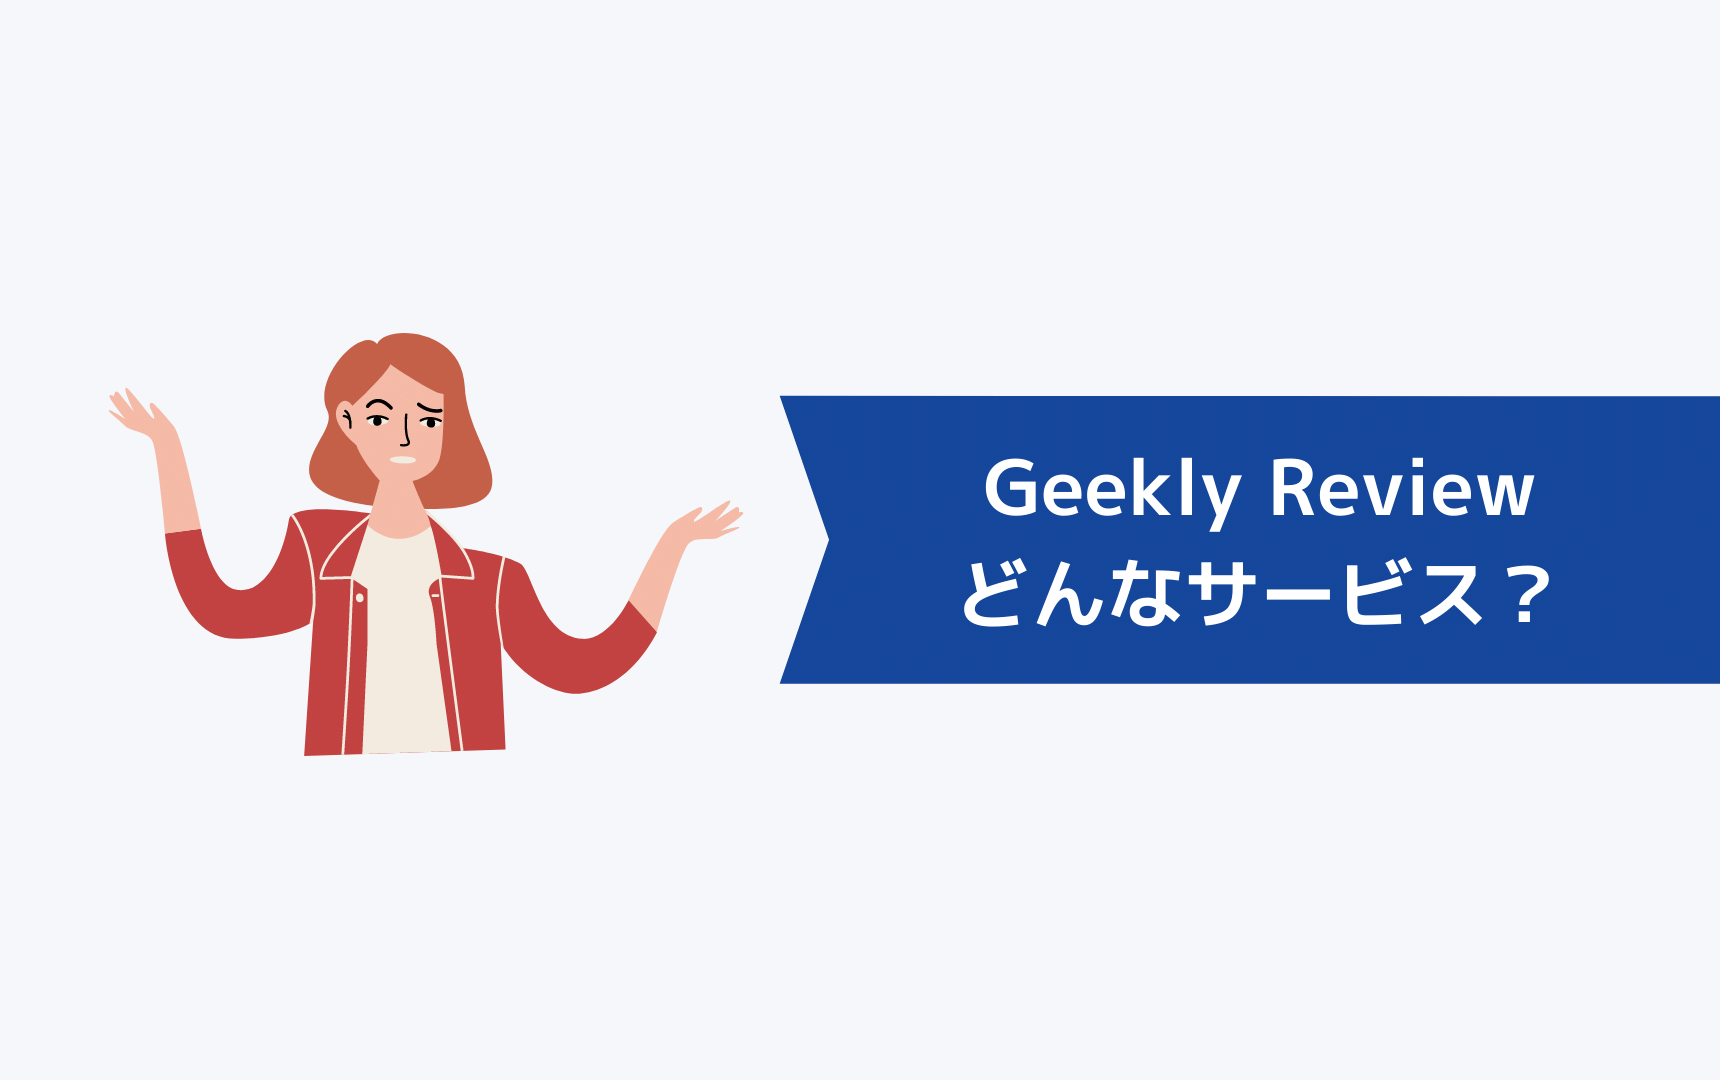 Geekly Reviewってどんなサービス？